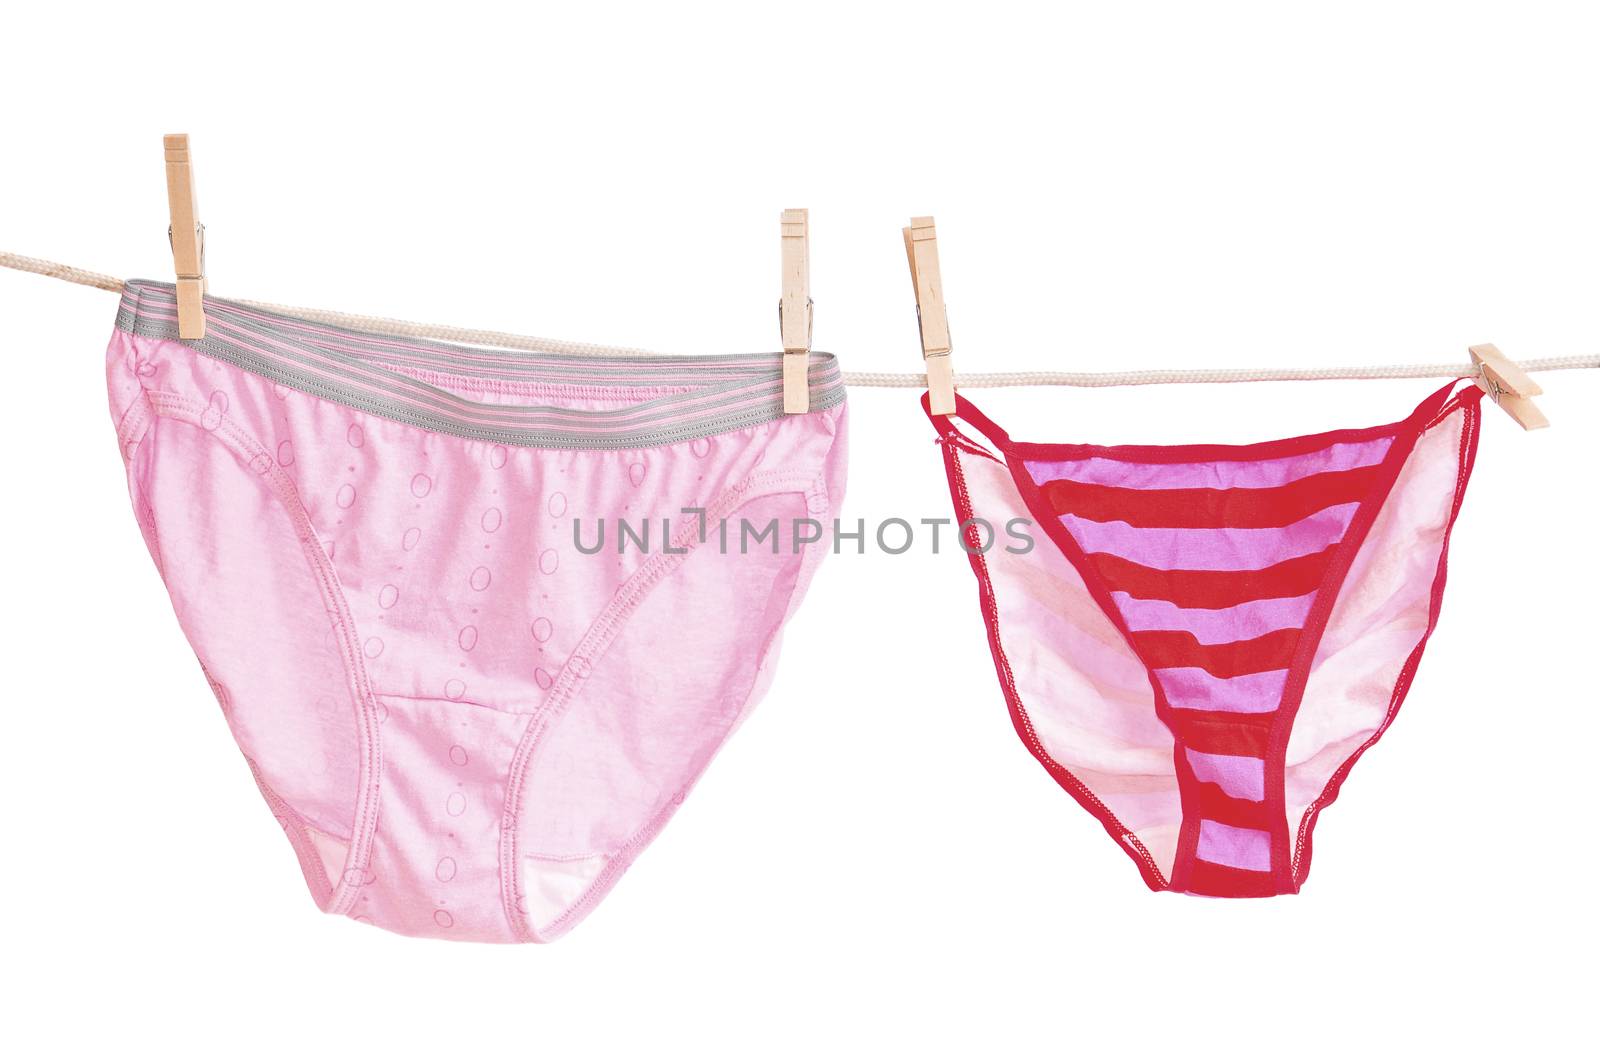 Two Pair of Panties on Clothesline by rcarner